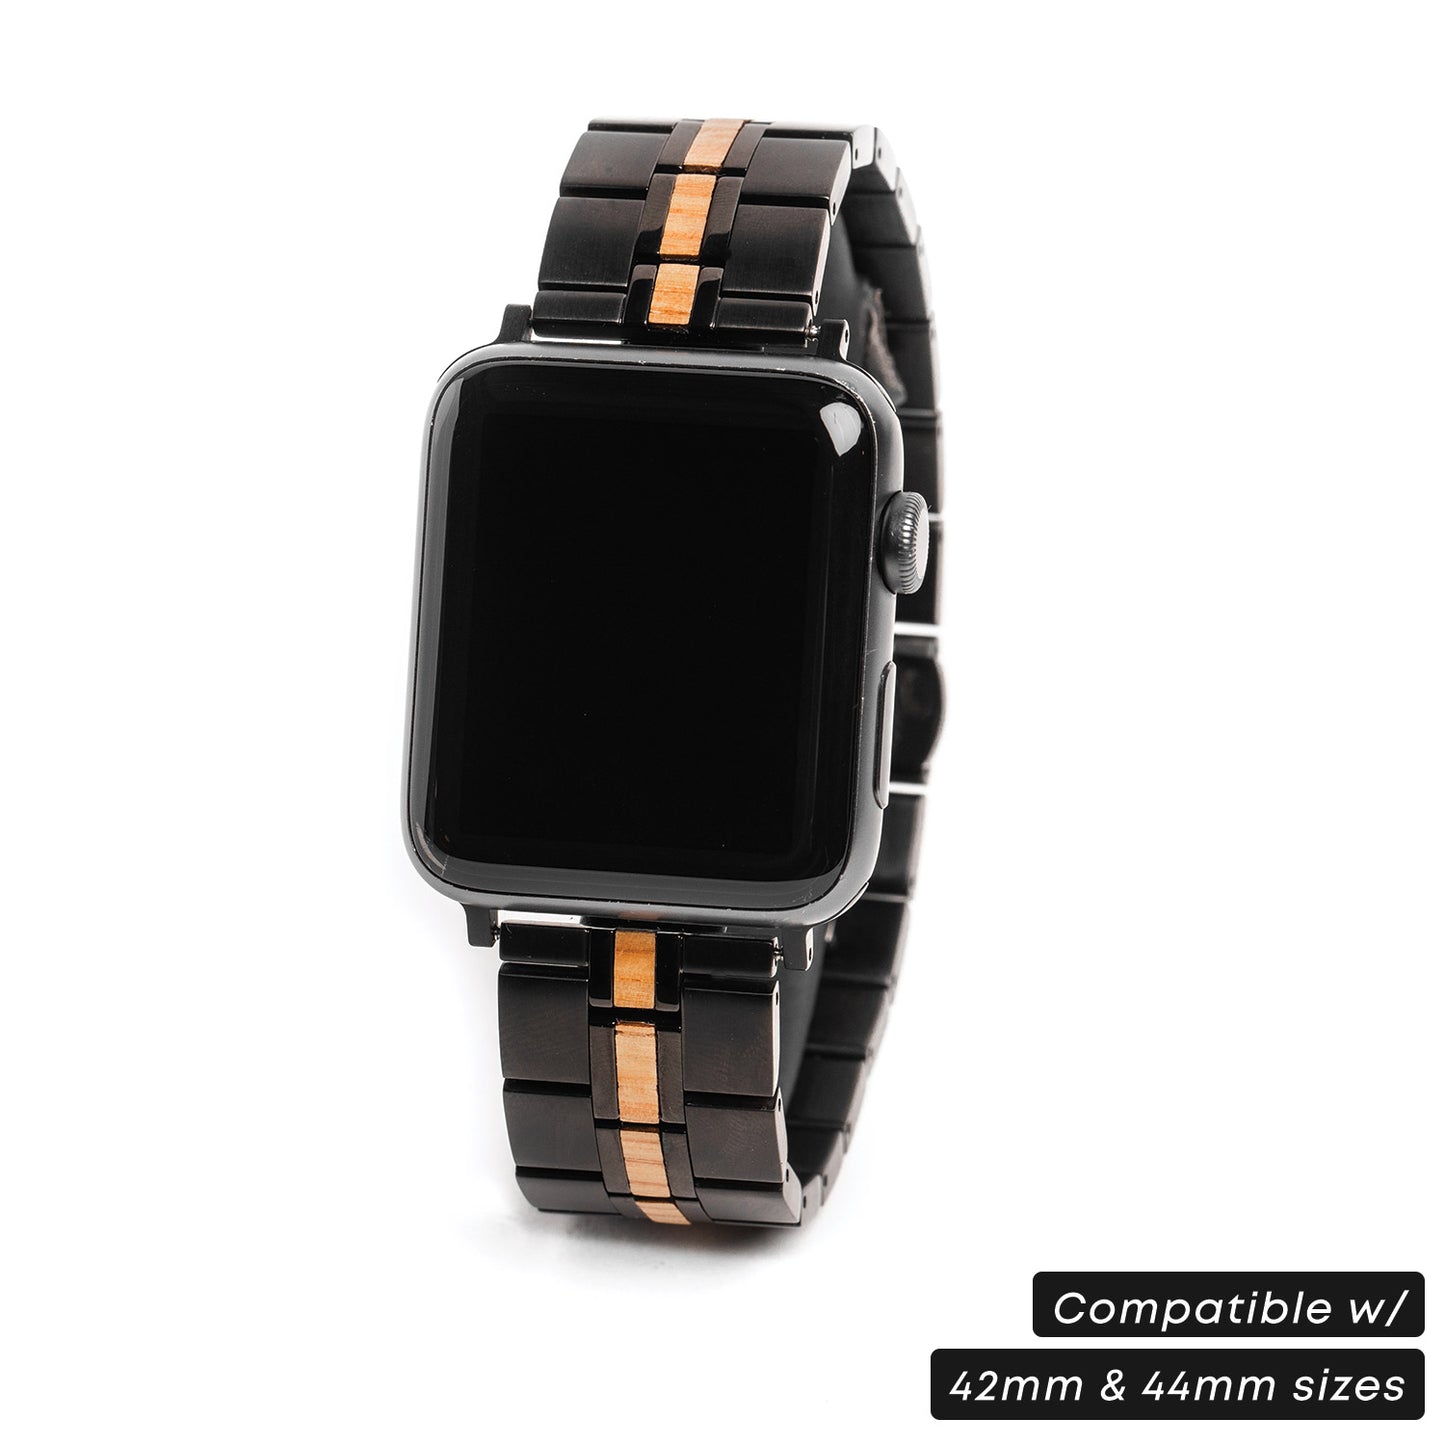 Nomad - Metal Watch Band for Apple Watch 42mm and 44mm - Black